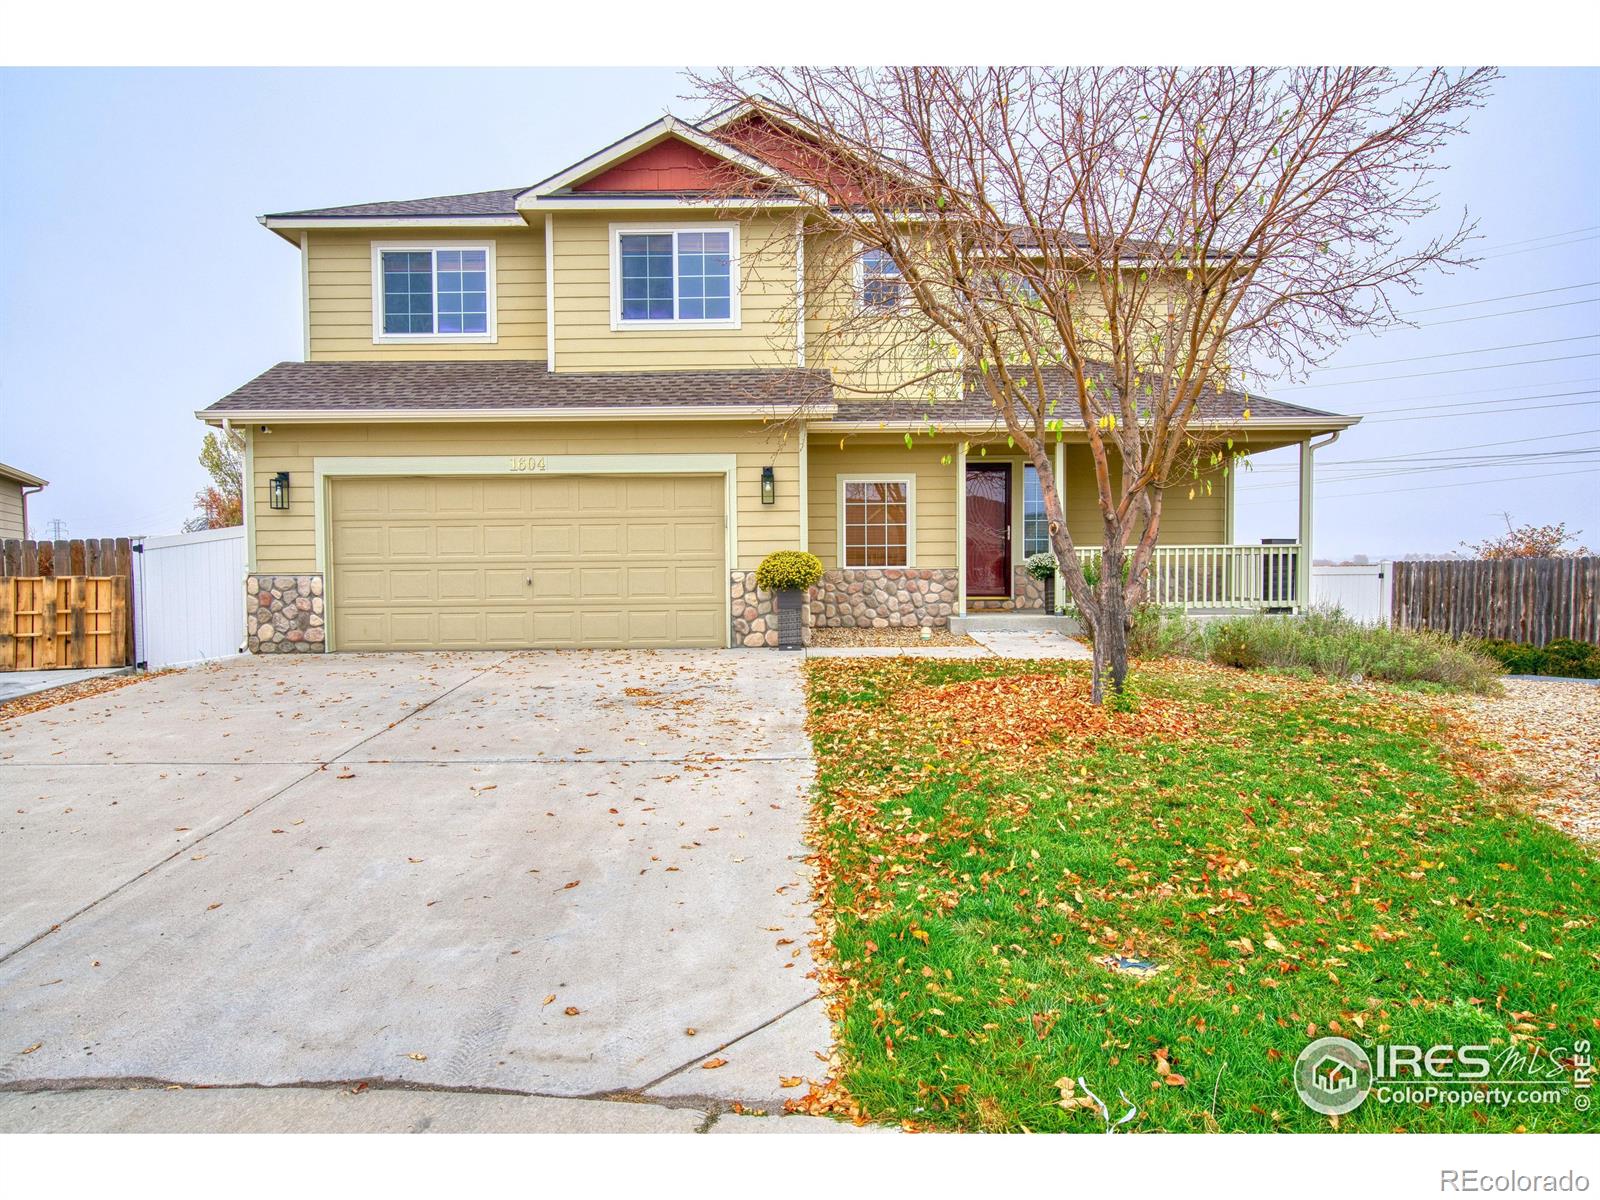 1604  84th Avenue, greeley MLS: 456789998946 Beds: 3 Baths: 3 Price: $448,500